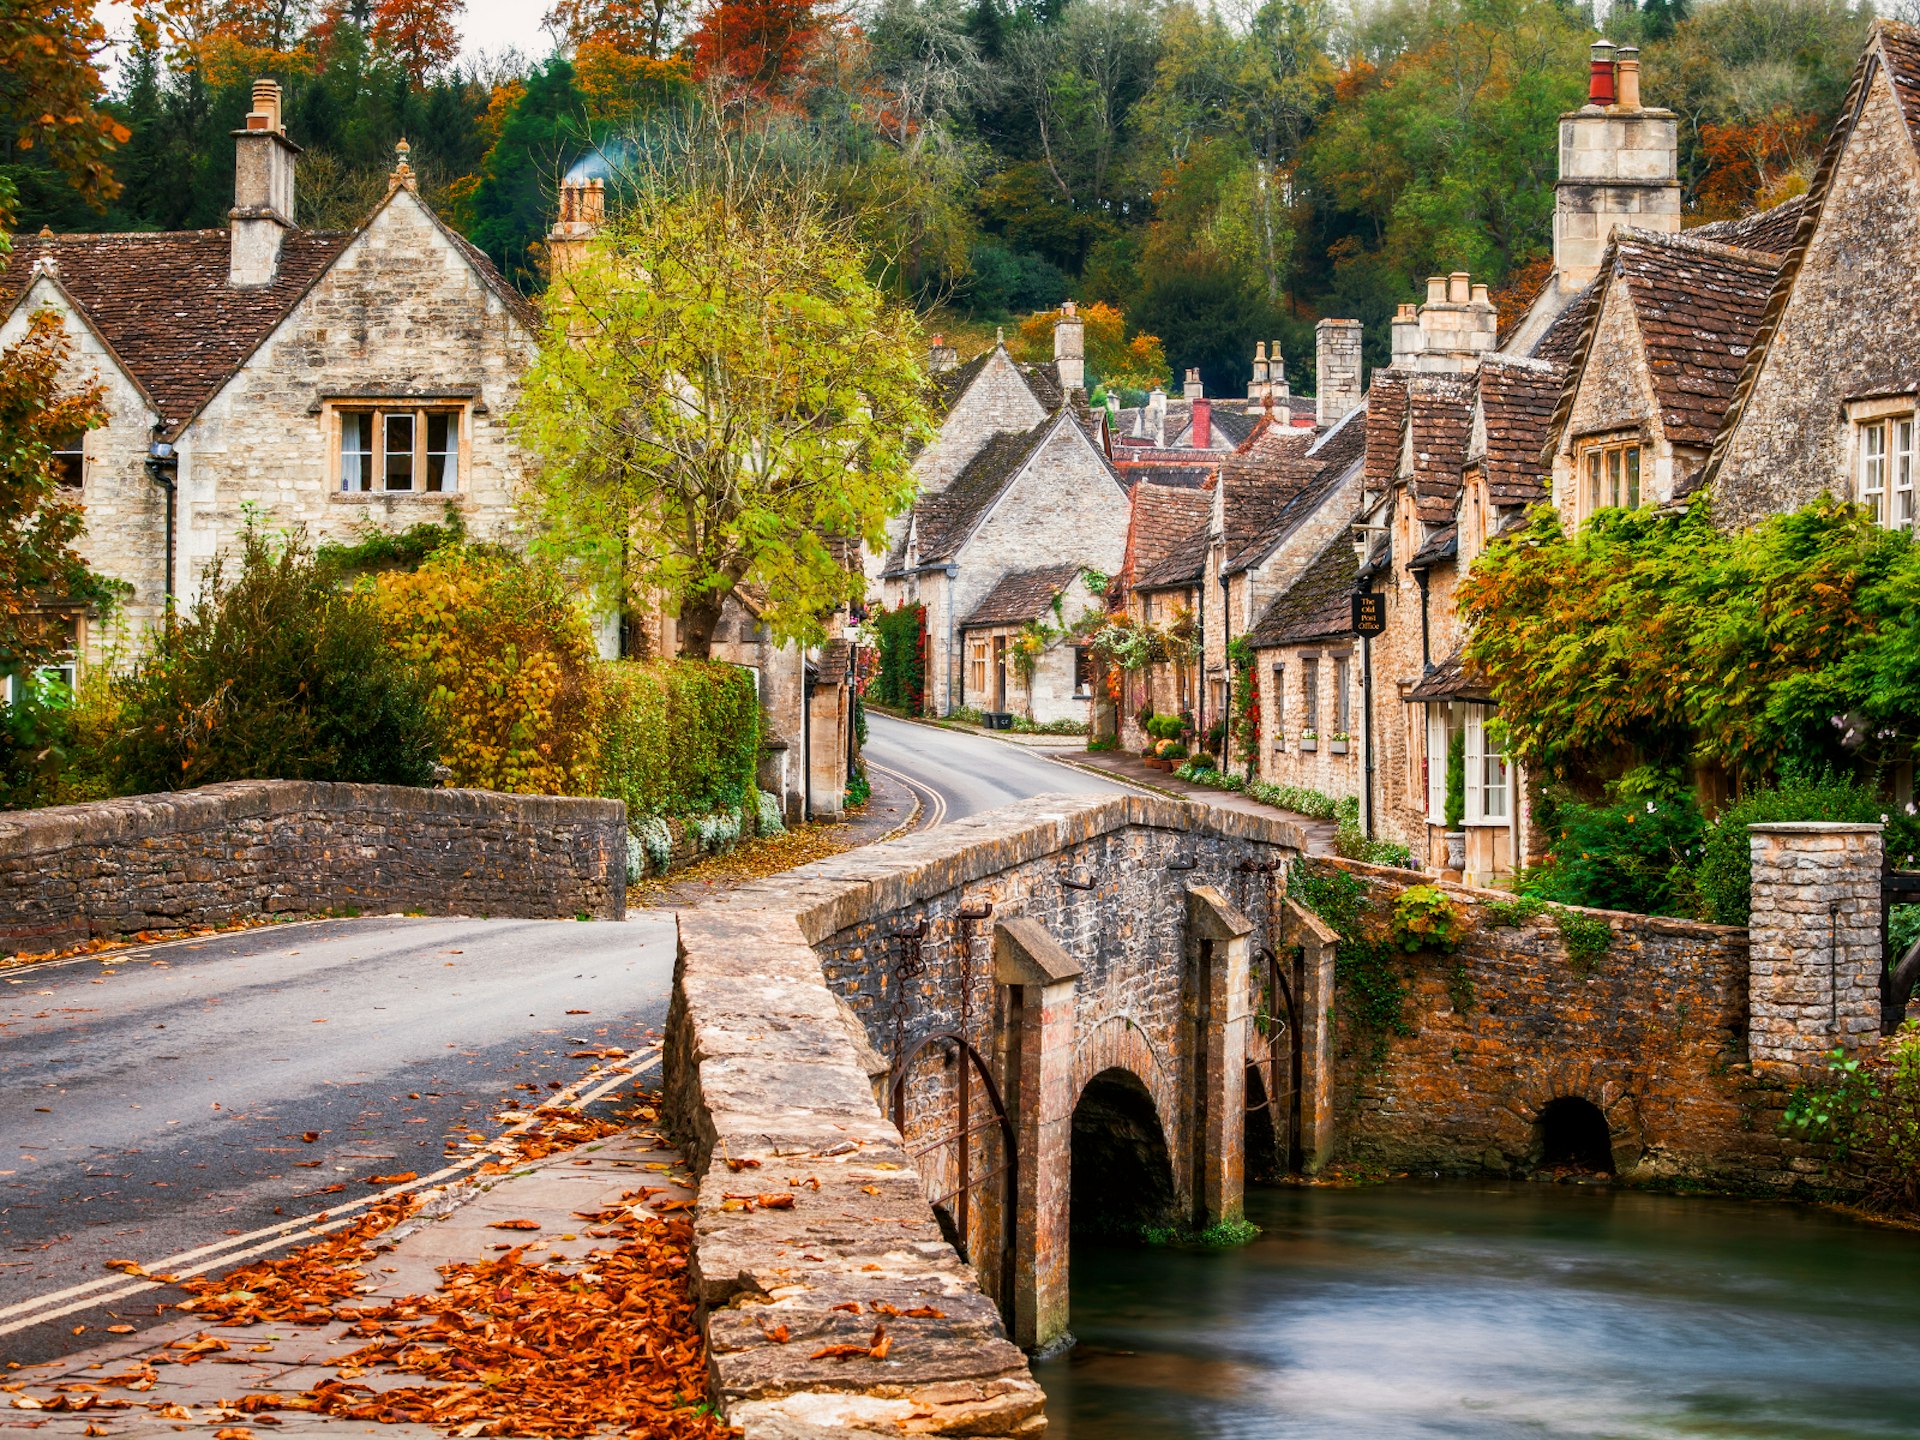 A road over a stone bridge leads to traditional cottages with pointed roofs and chimneys with autumn foliage all around